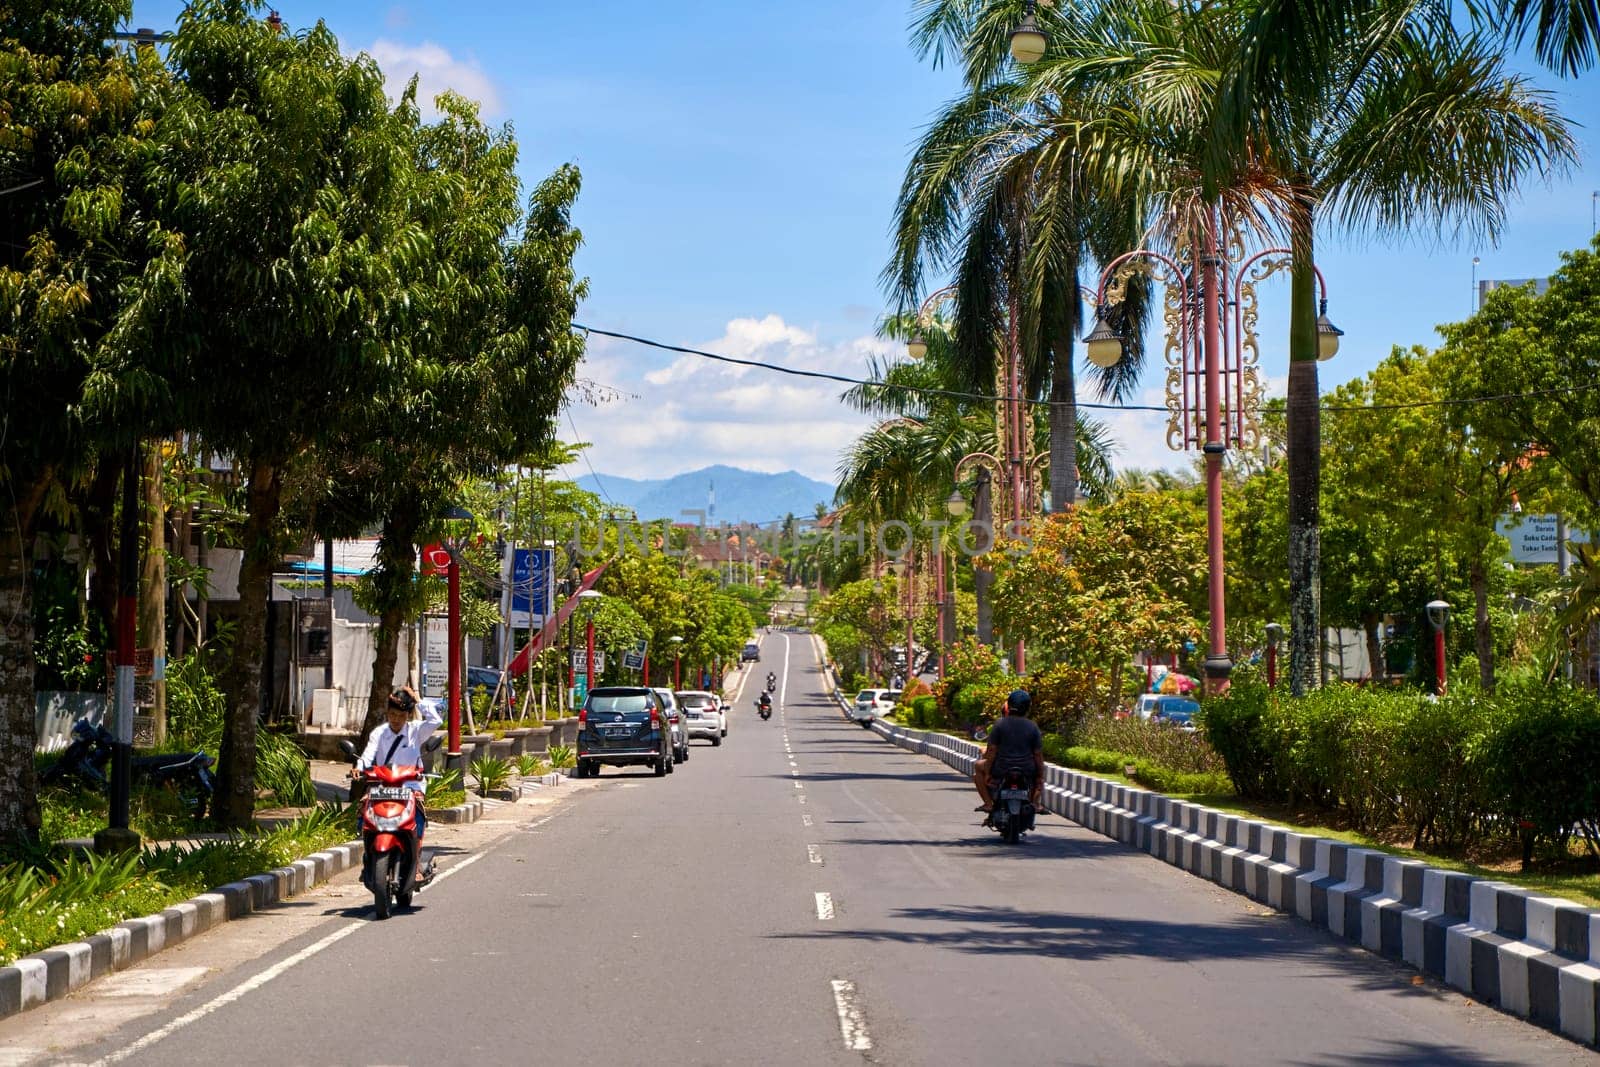 A person on a motorcycle rides a scenic asphalt road in Asia. Bali, Indonesia - 12.08.2022